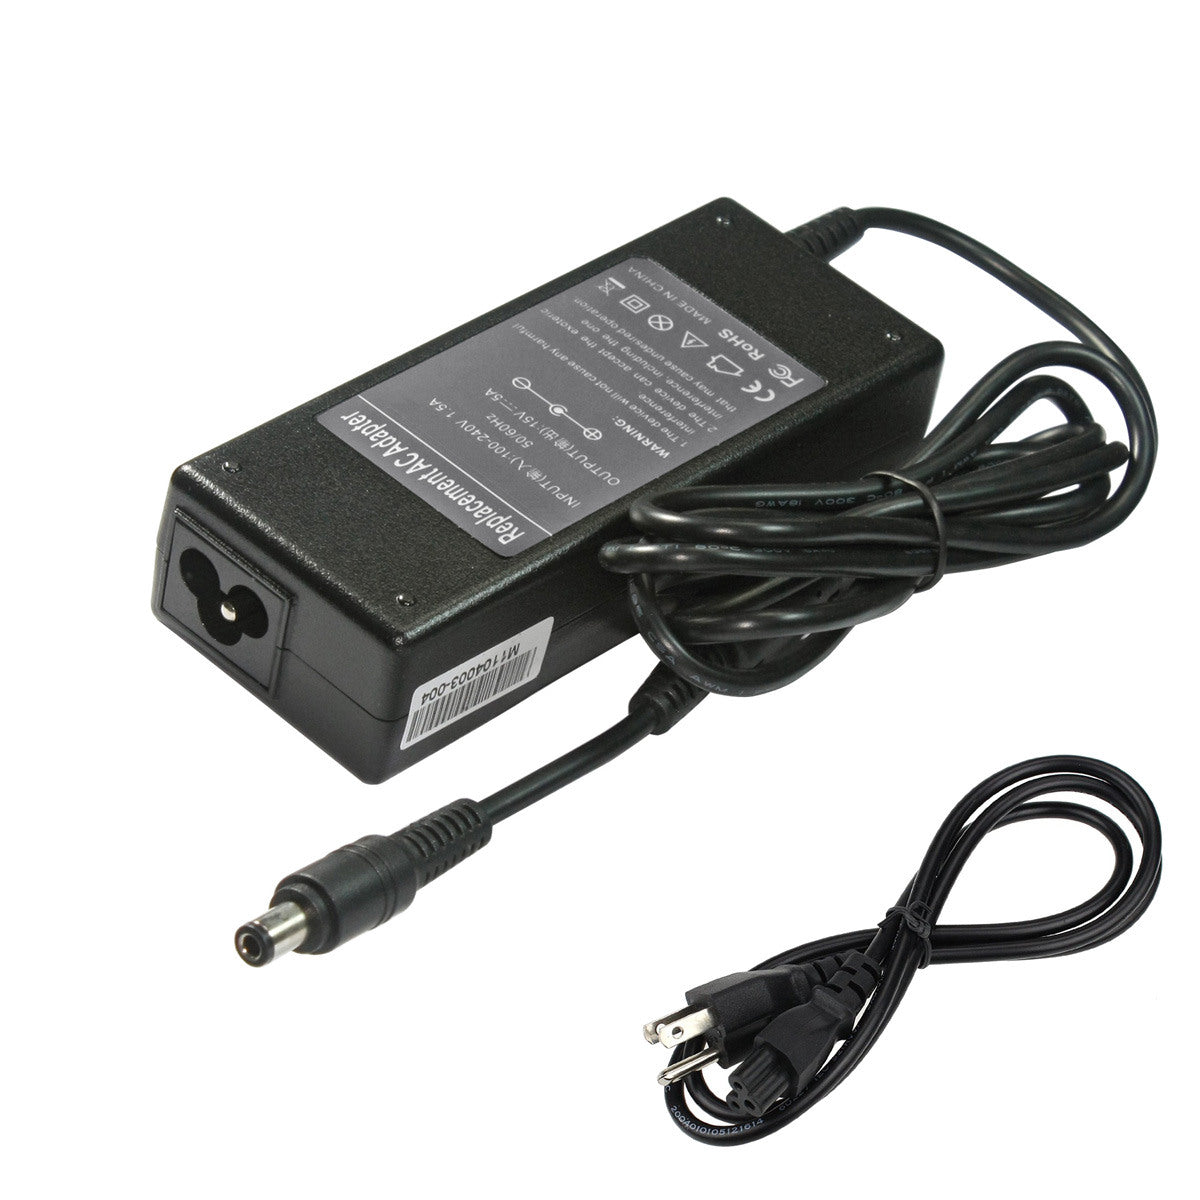 Compatible Designed Toshiba Satellite 1415 Series Charger.